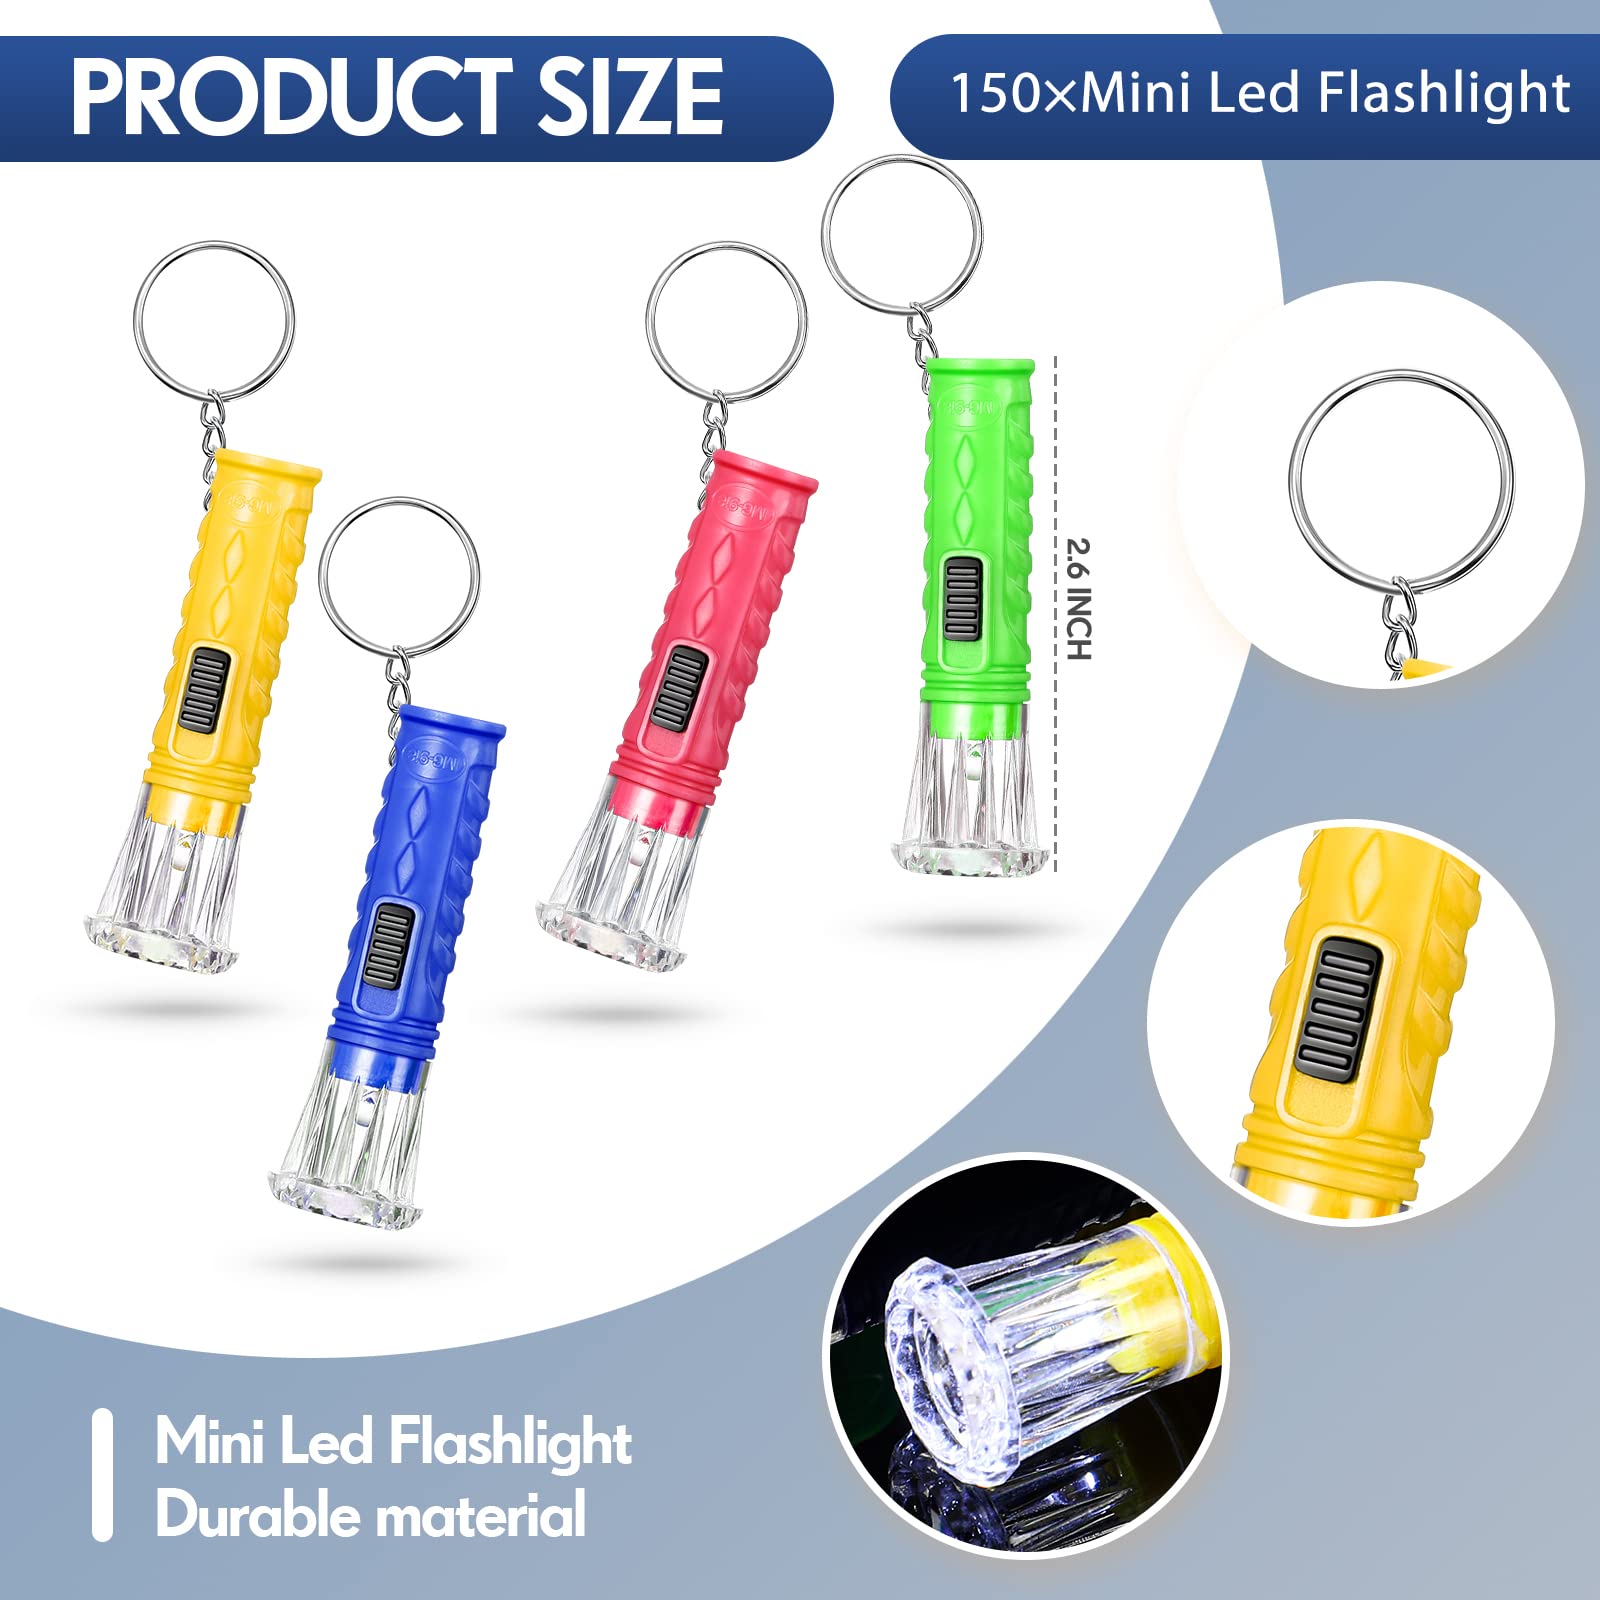 150 Pcs Mini Flashlight Keychain, Assorted Colors Portable Led Toy Flashlight, Colored Handheld Plastic Keychain Flashlights, Led Key Chains for Kids Halloween Hiking Camping Cycling Party Favors